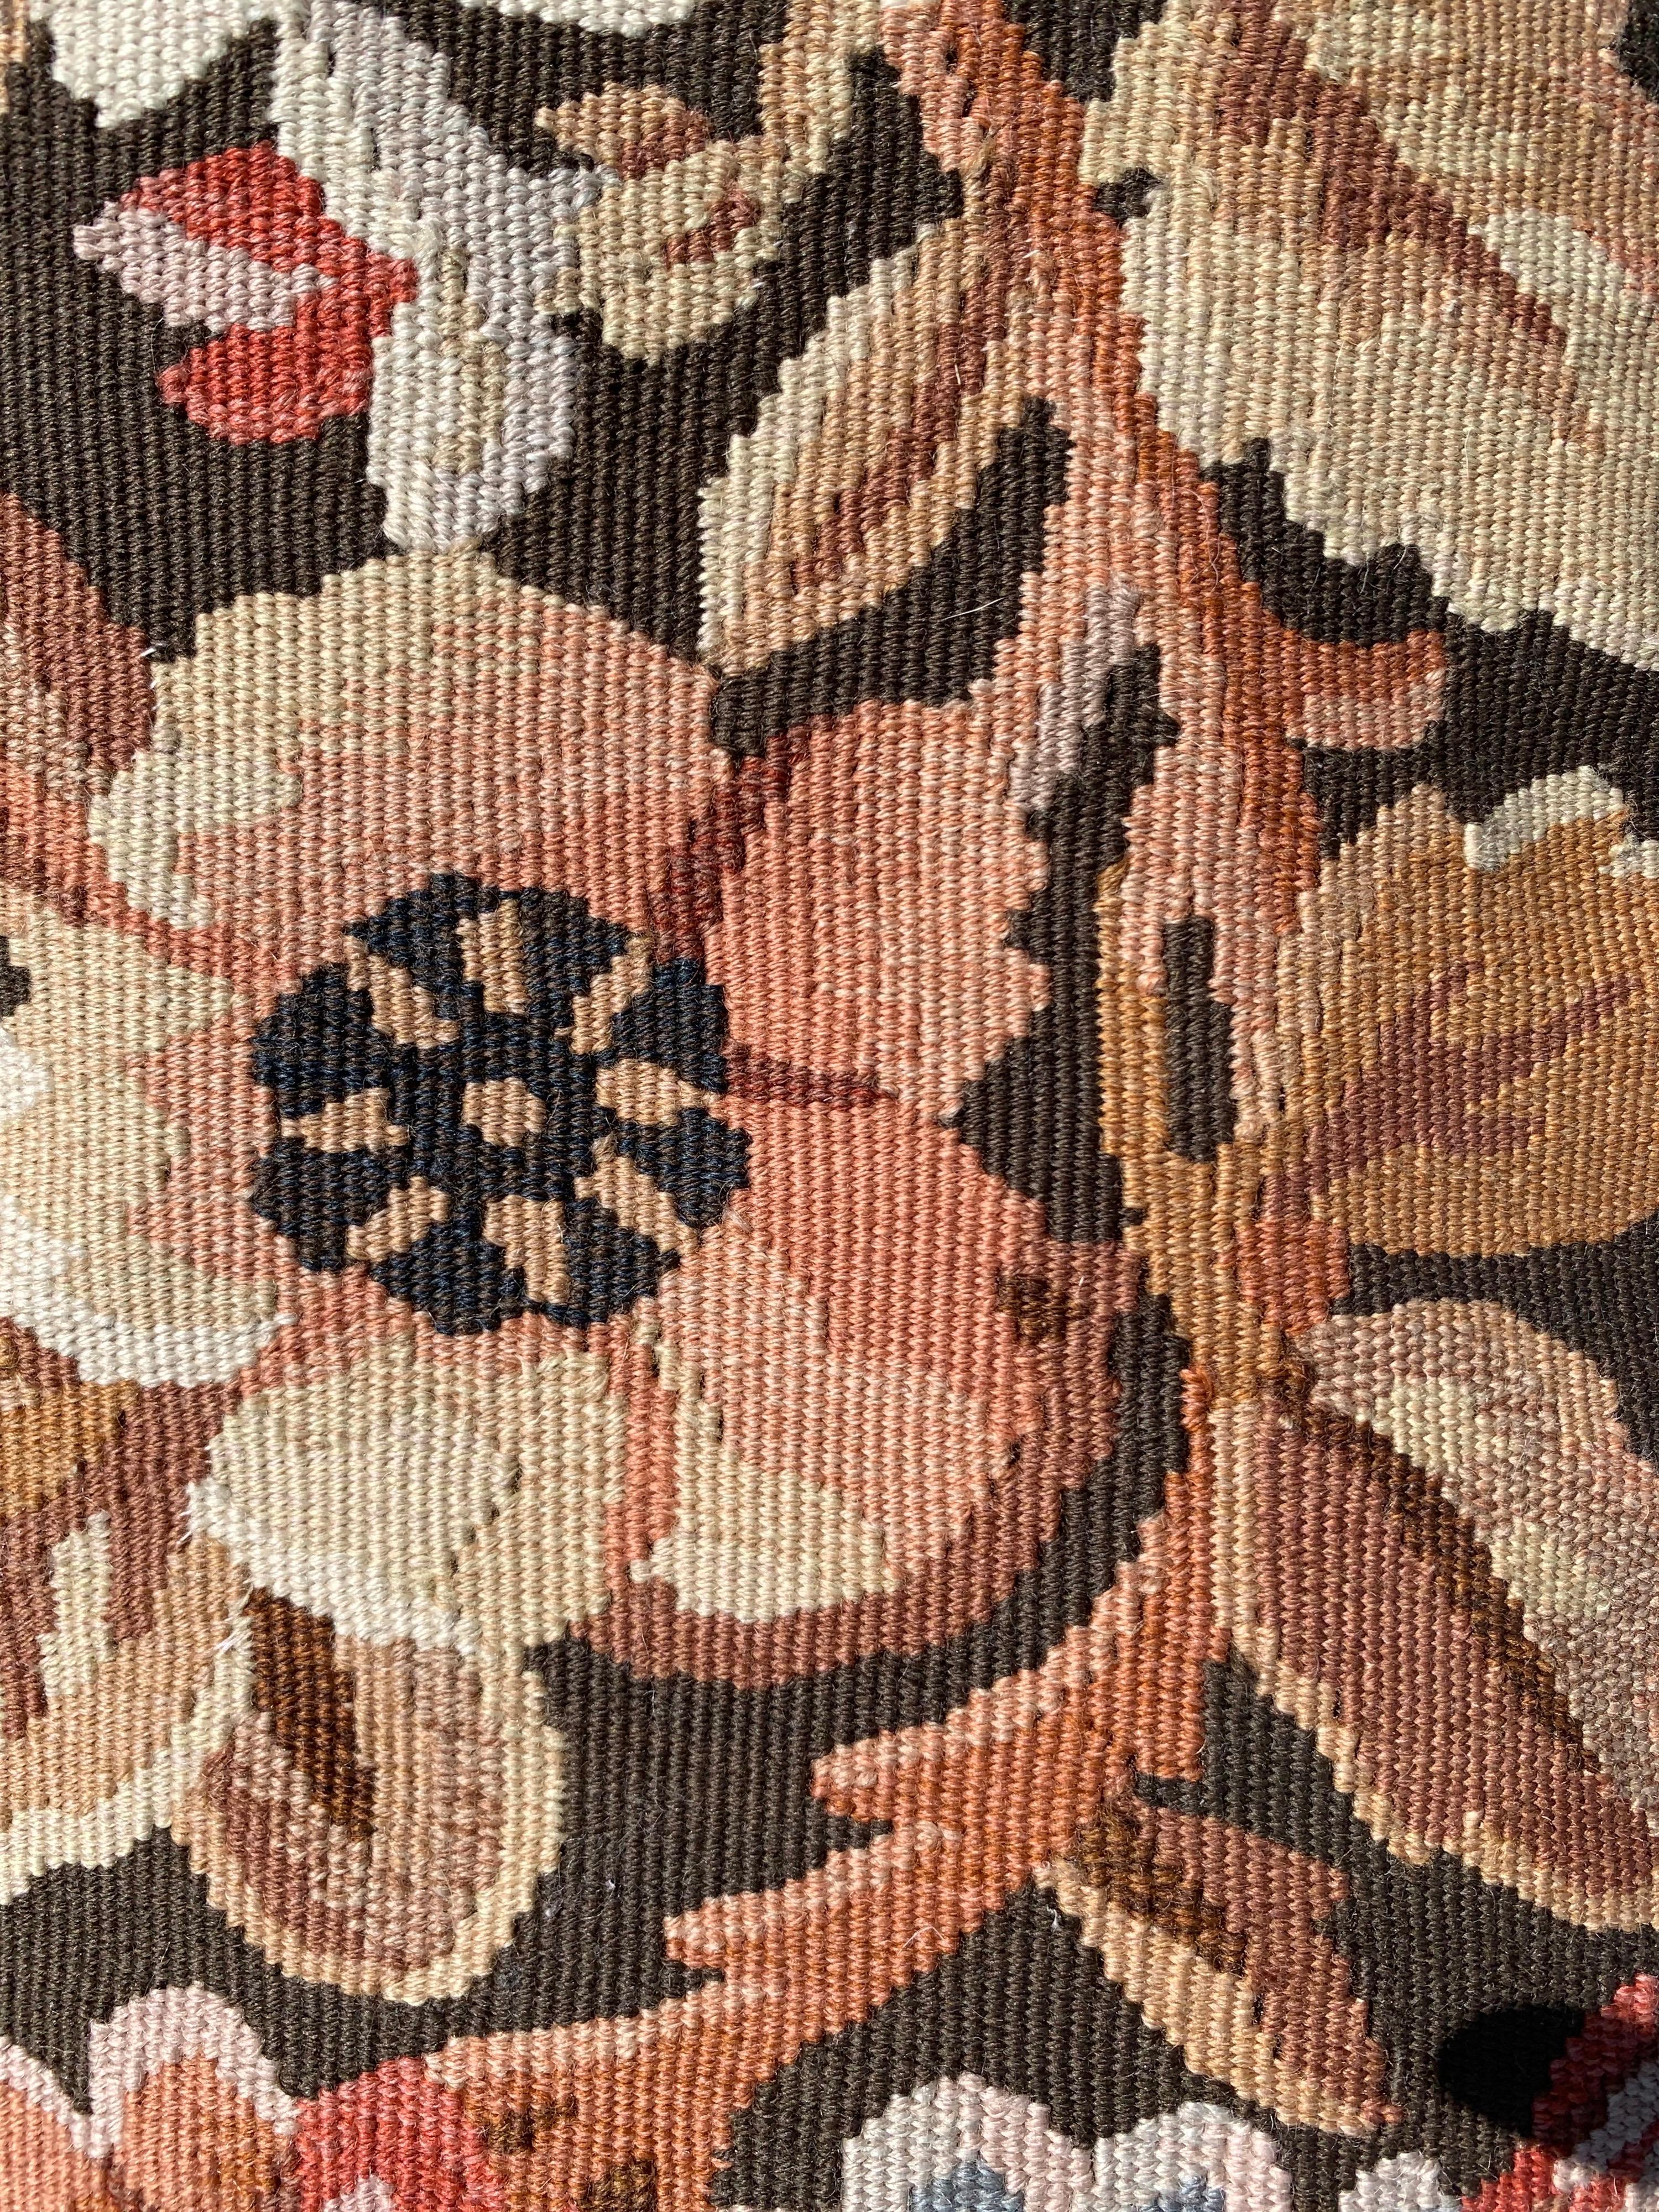 This is a lovely 20th century brown floral French Aubusson style needlepoint lumbar pillowcase. It is new and has never been used. It measures 16.5 x 21 inches.